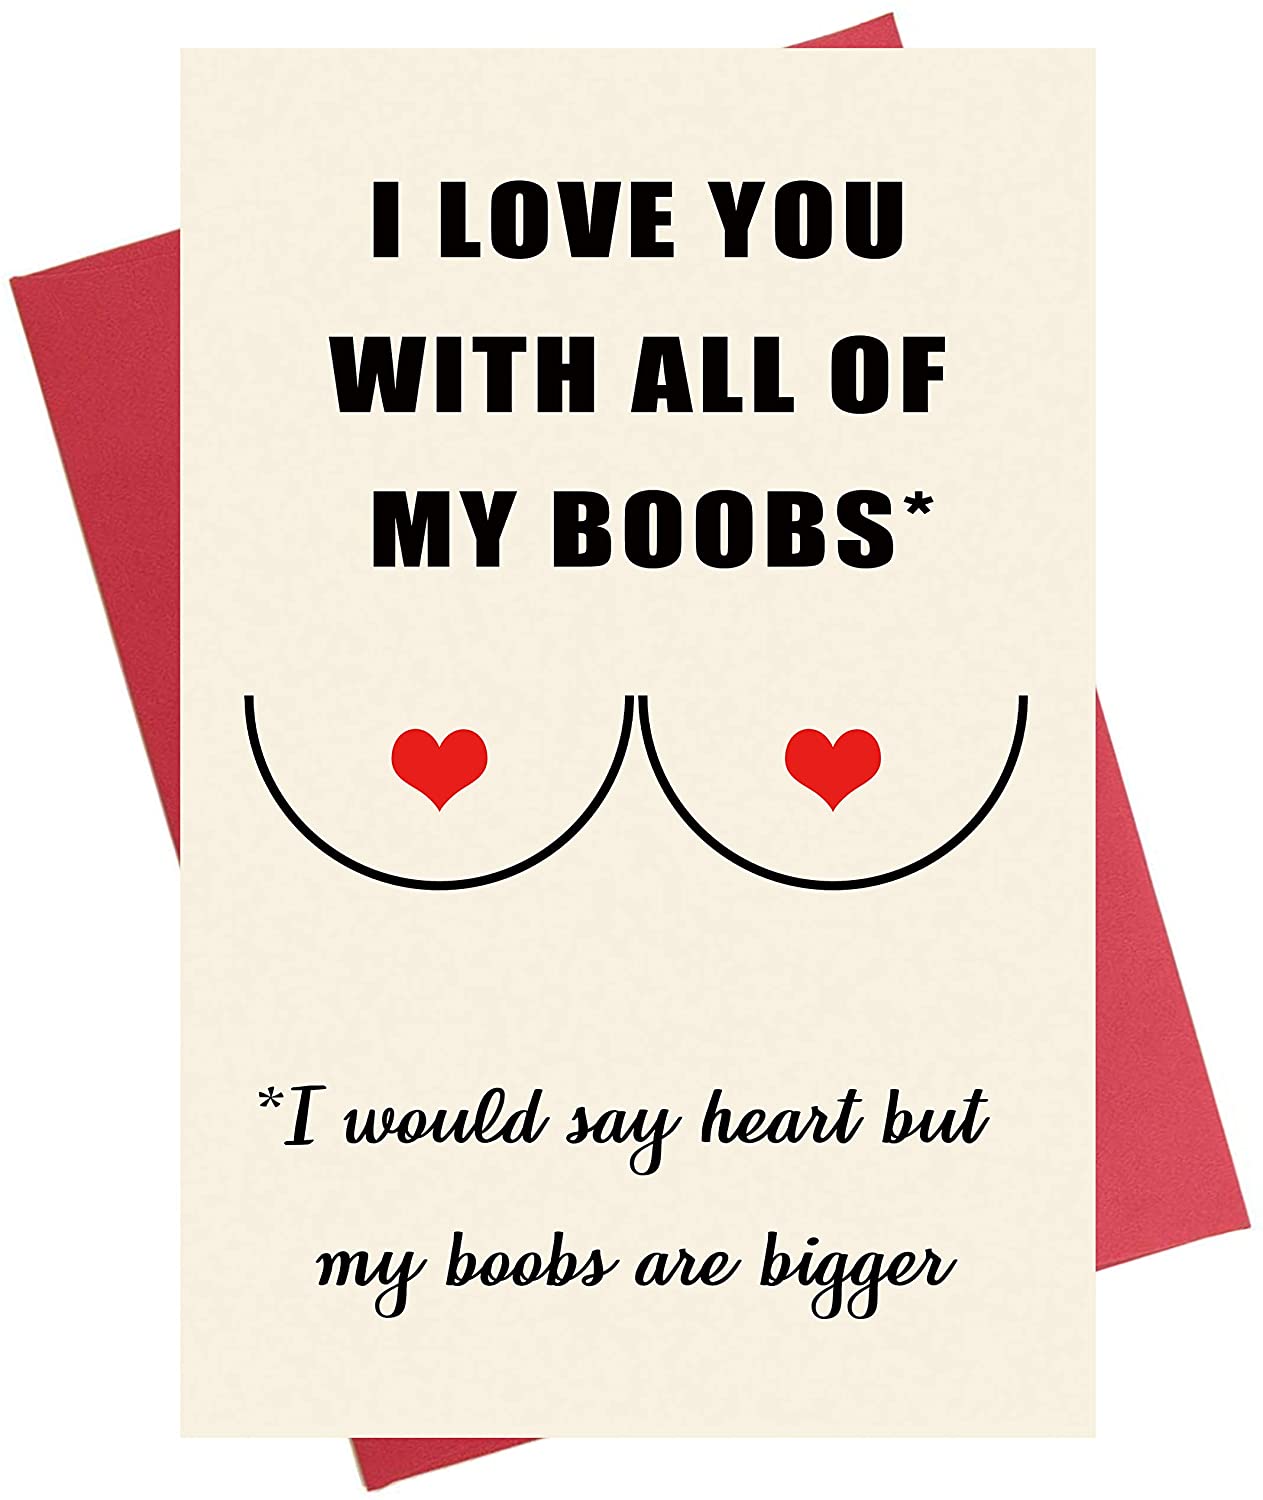 Funny Anniversary Card Rude Valentines Card for Husband Or Wife Comes with Fun Stickers “You’re So Fit” Central 23 